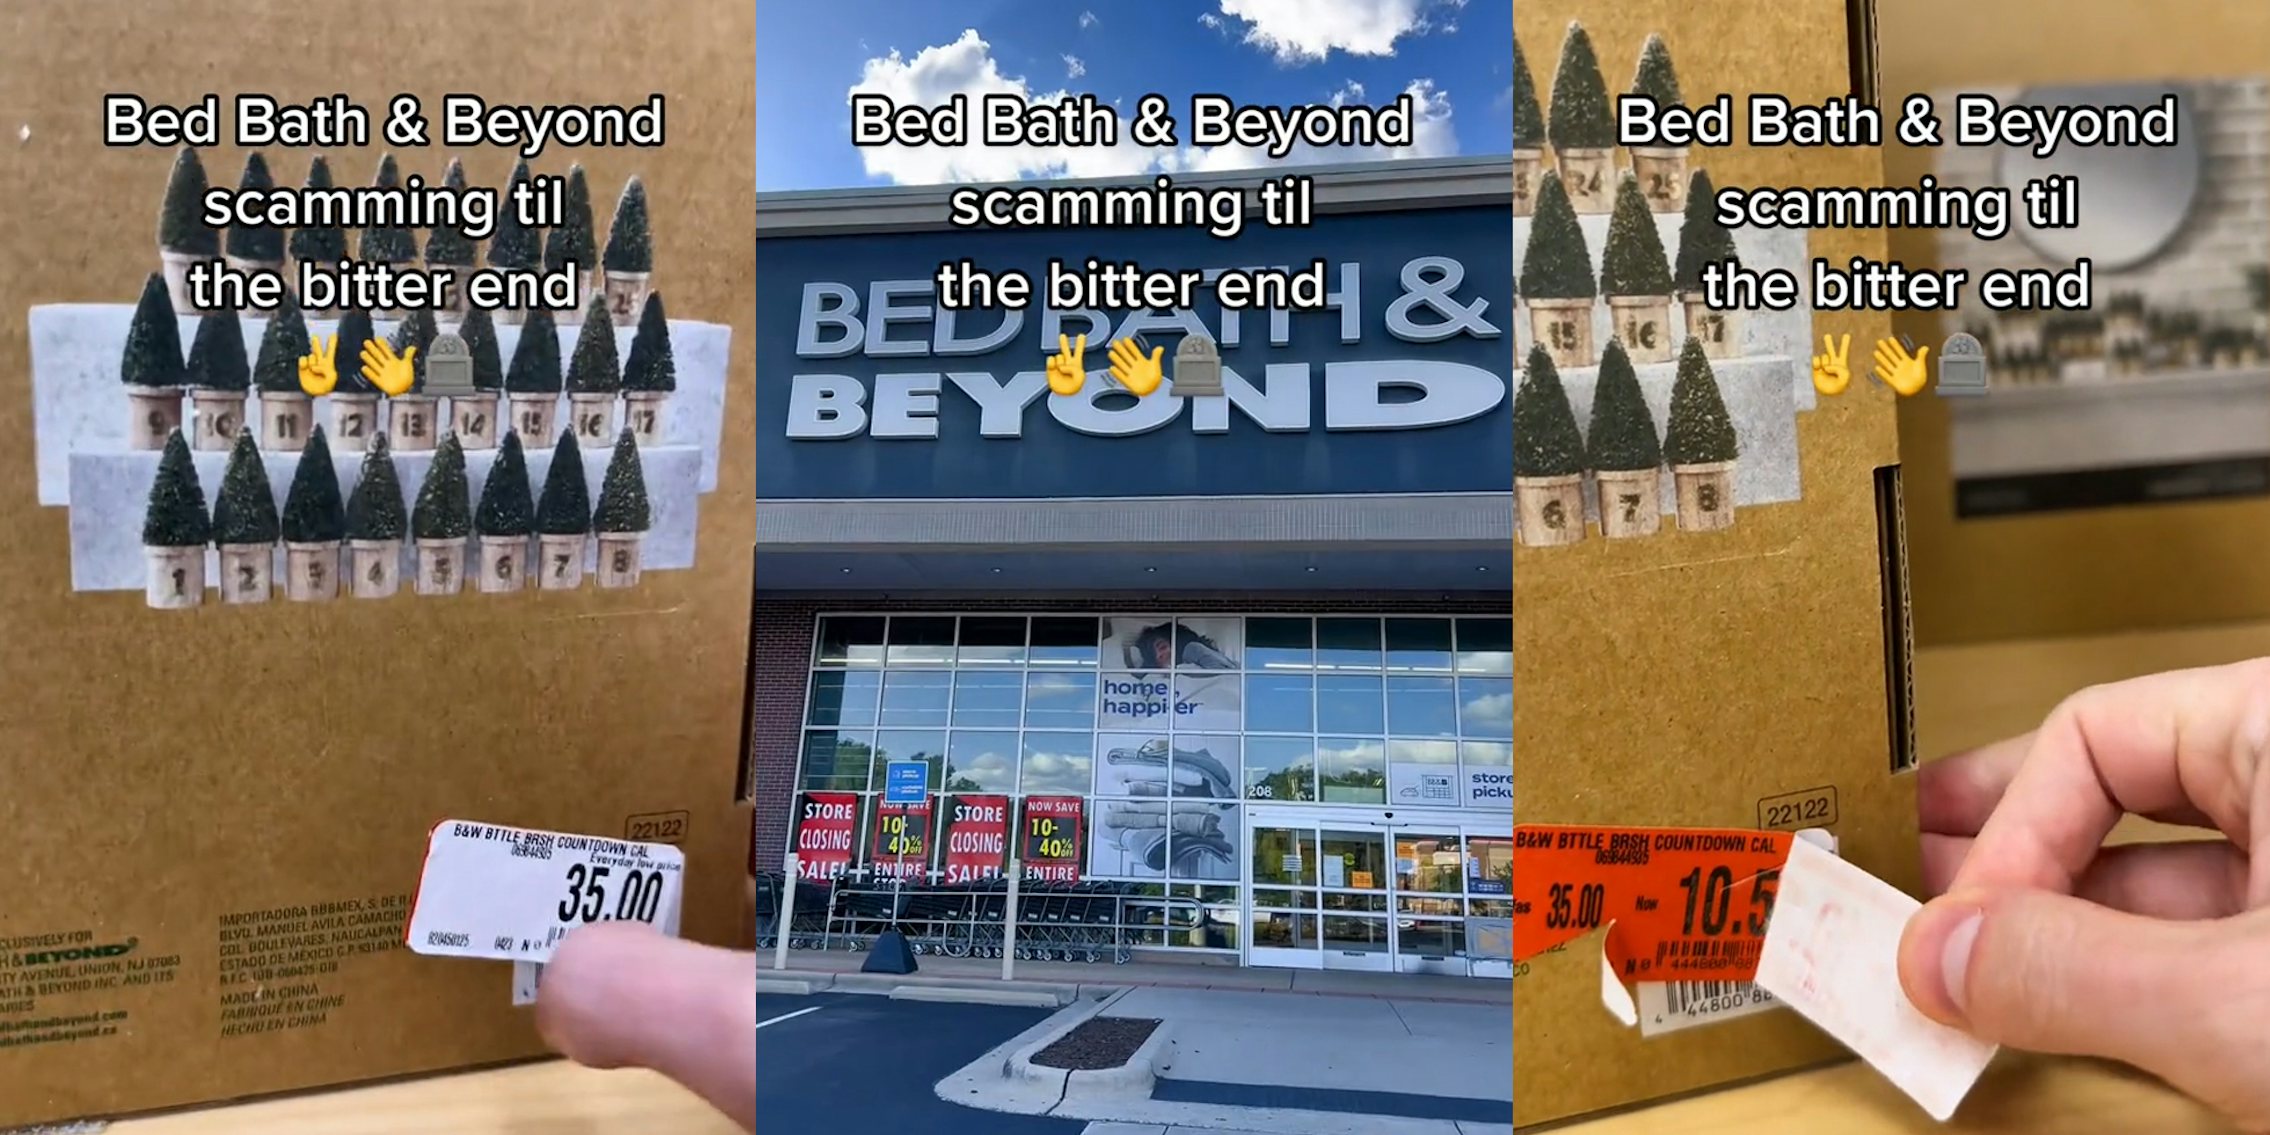 Customers Mock Bed, Bath & Beyond's Closing Prices